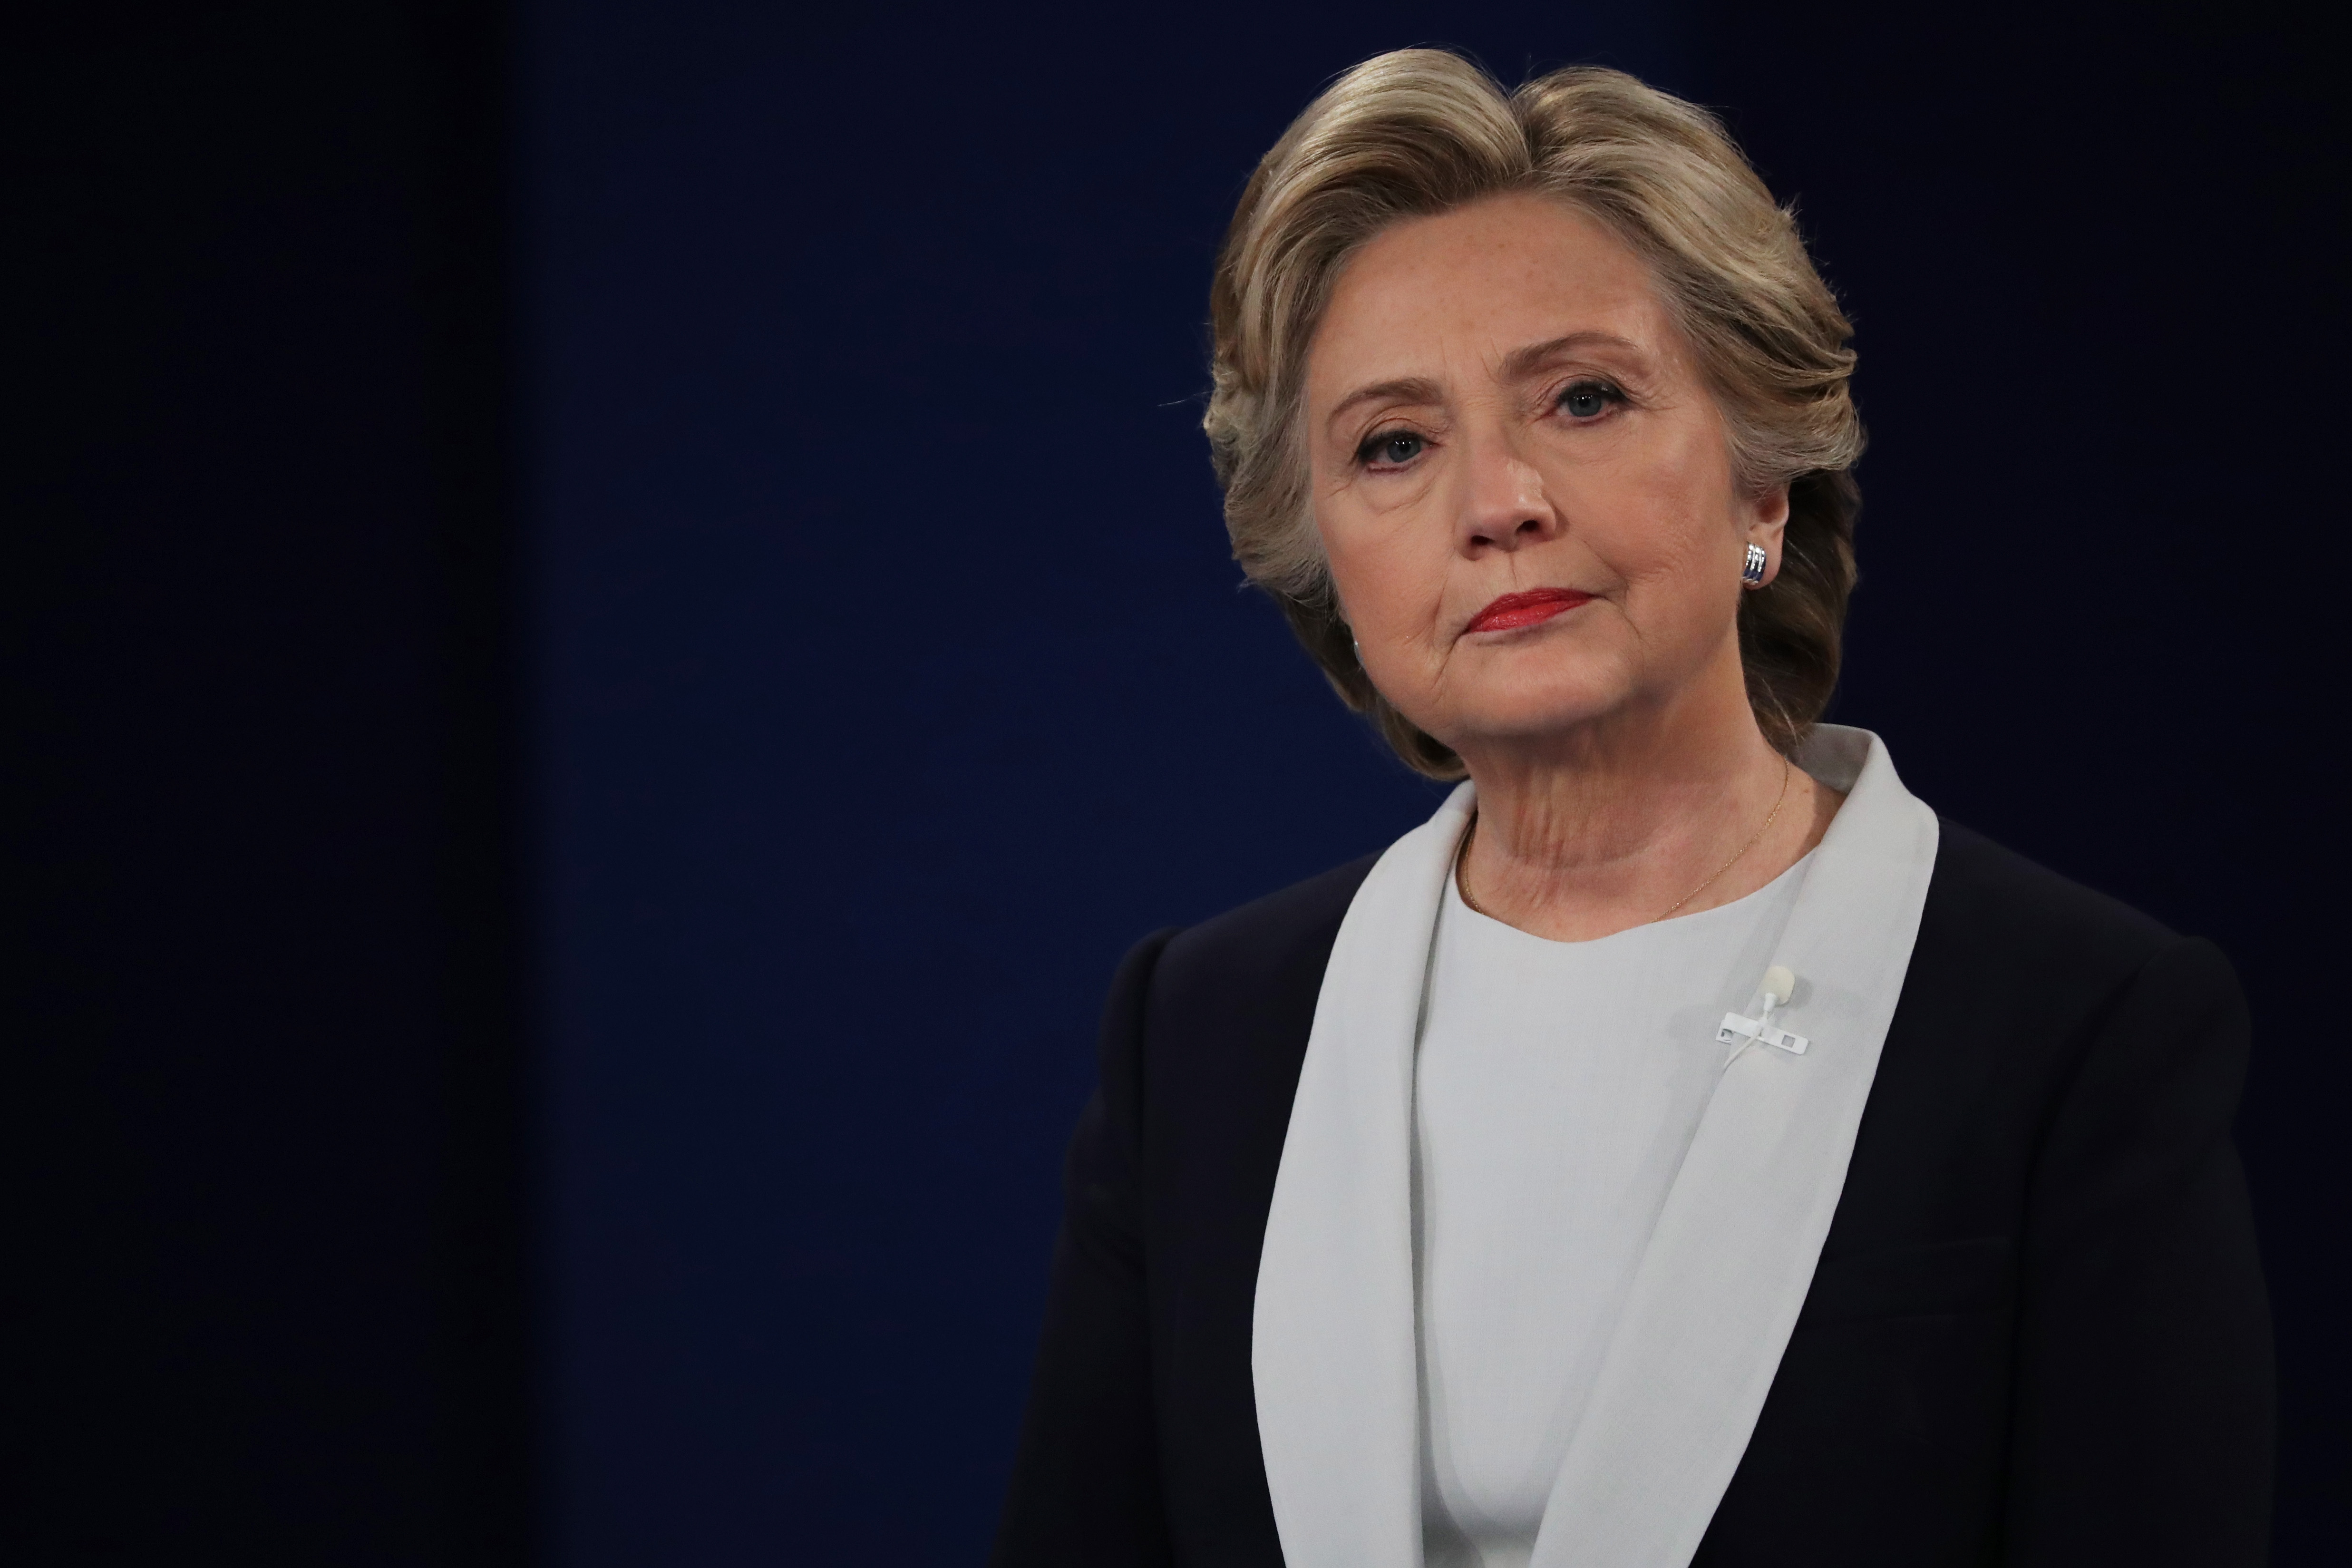 ST LOUIS, MO - OCTOBER 09: Democratic presidential nominee former Secretary of State Hillary Clinton listens to a question during the town hall debate at Washington University on October 9, 2016 in St Louis, Missouri. This is the second of three presidential debates scheduled prior to the November 8th election. (Photo by Chip Somodevilla/Getty Images)